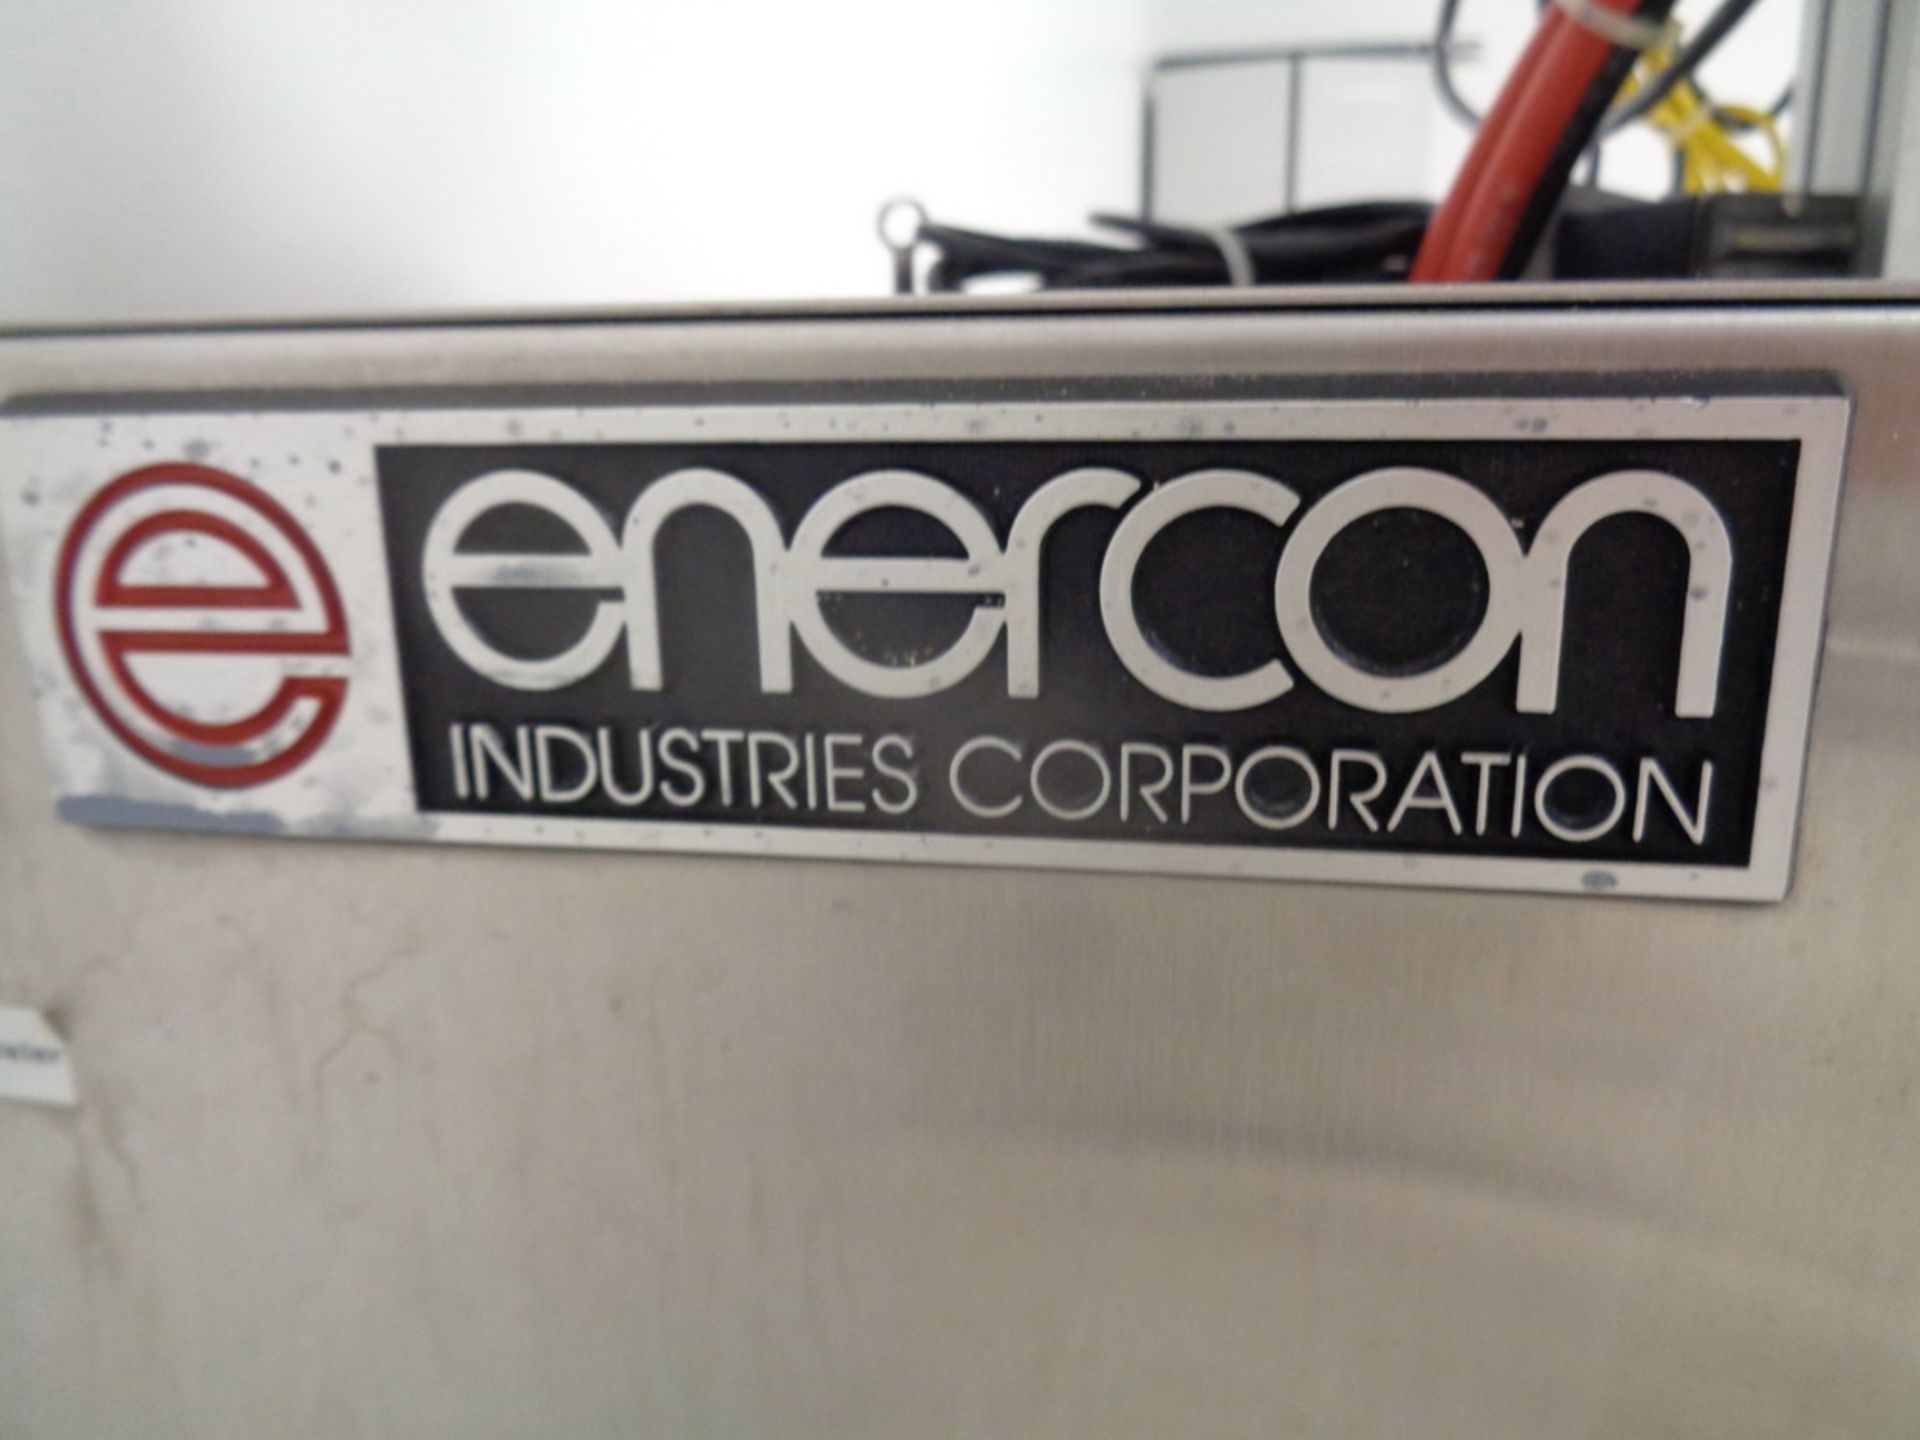 ENERCON INDUCTION CAP SEALER, MODEL LM3284-04, SERIAL NUMBER 10419-1, SEE AUCTIONEER NOTE - Image 5 of 9